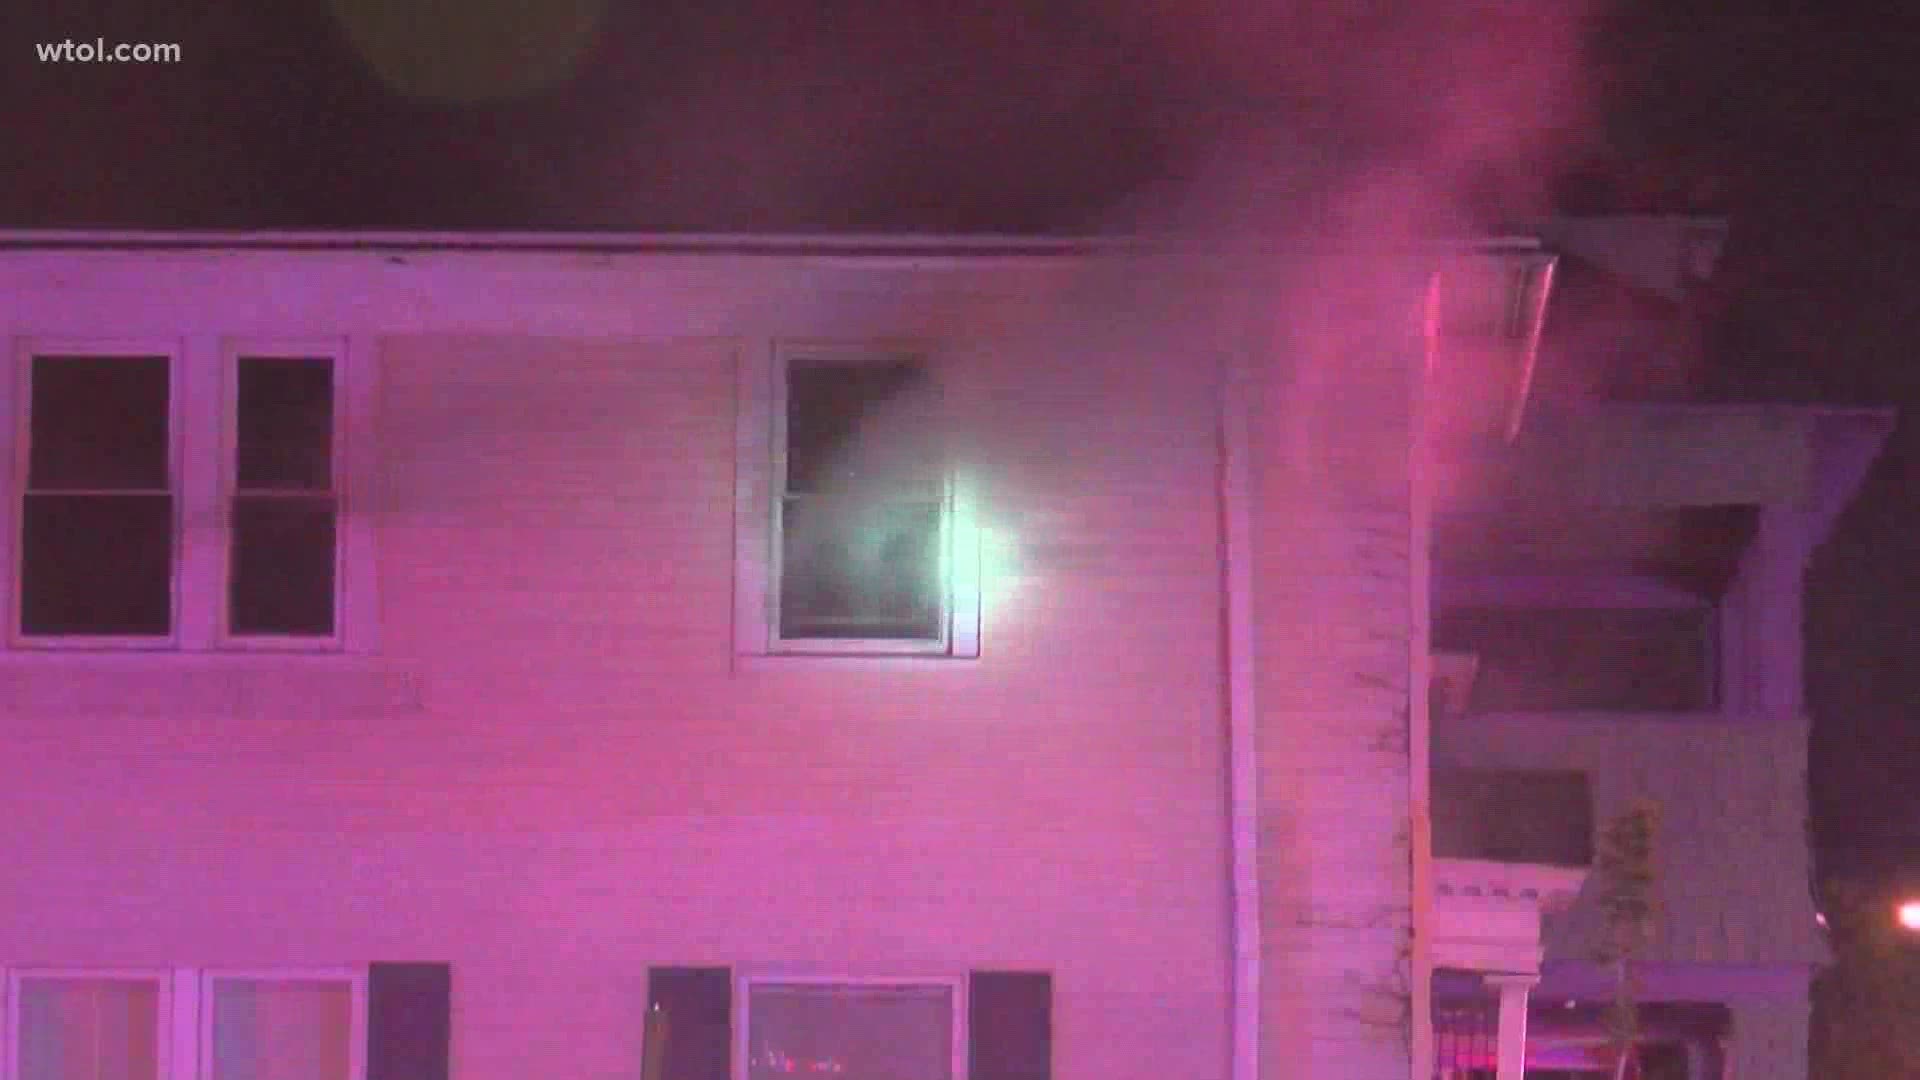 Nobody was home when the fire broke out around 3 a.m. on Dorr and Parkside.